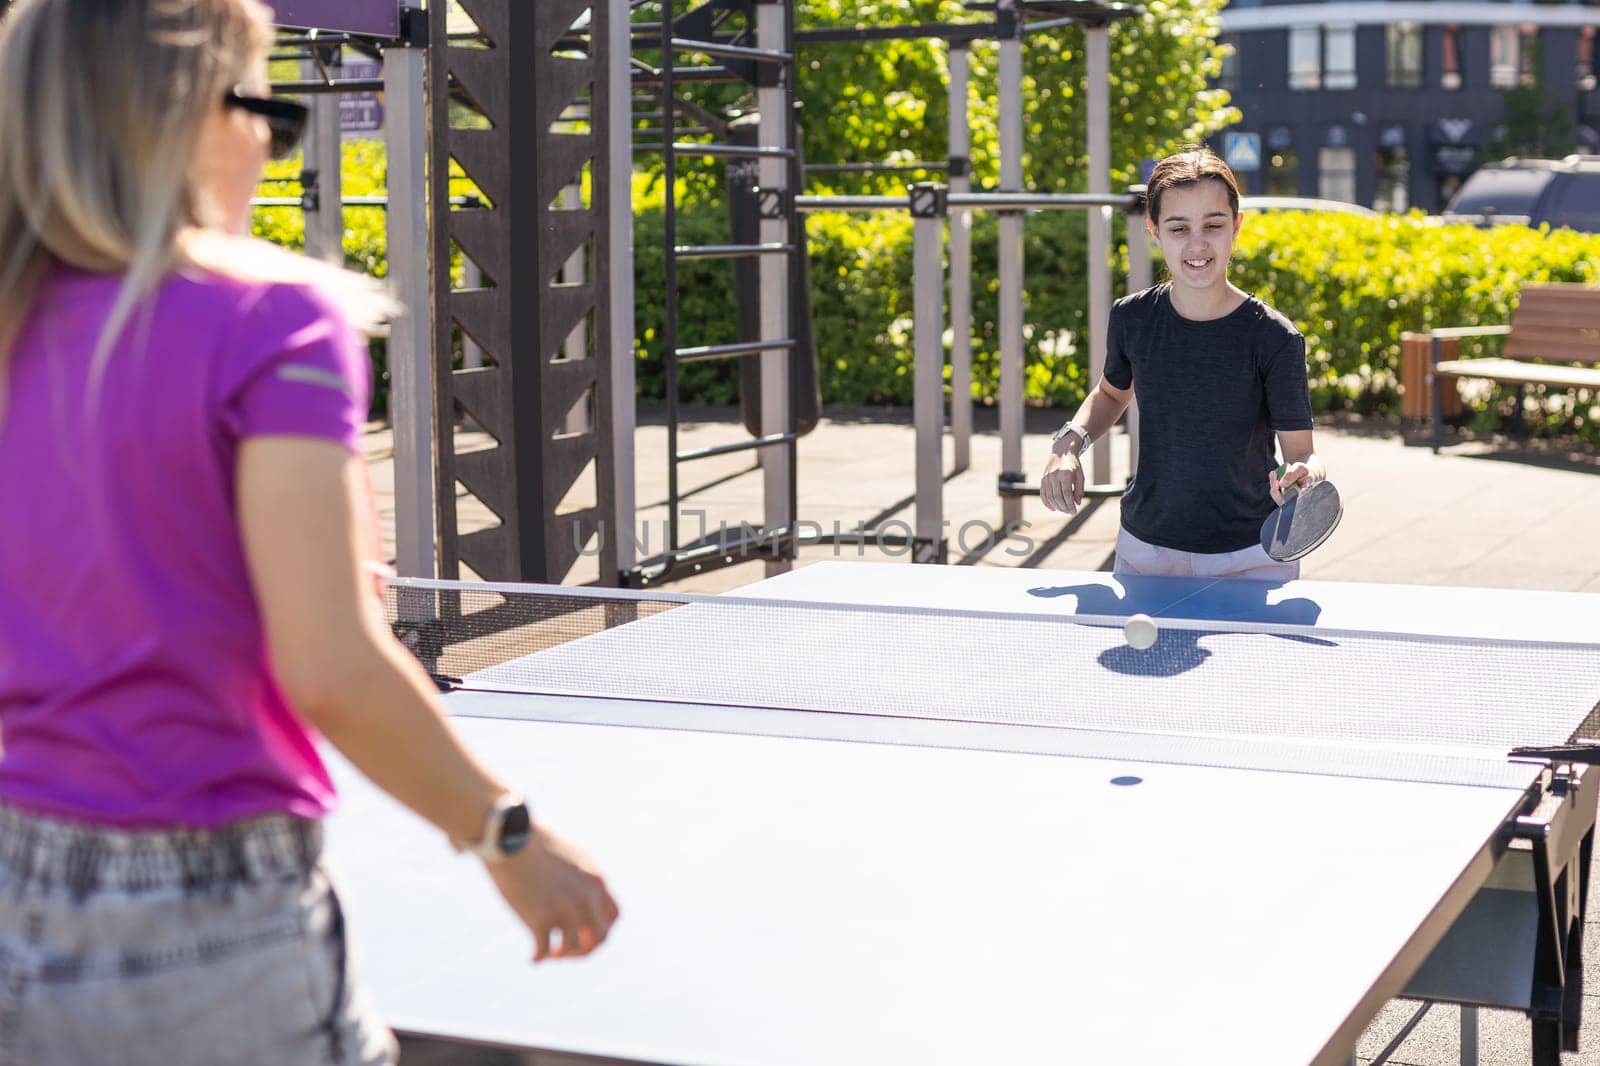 mother and daughter play ping pong in park. High quality photo